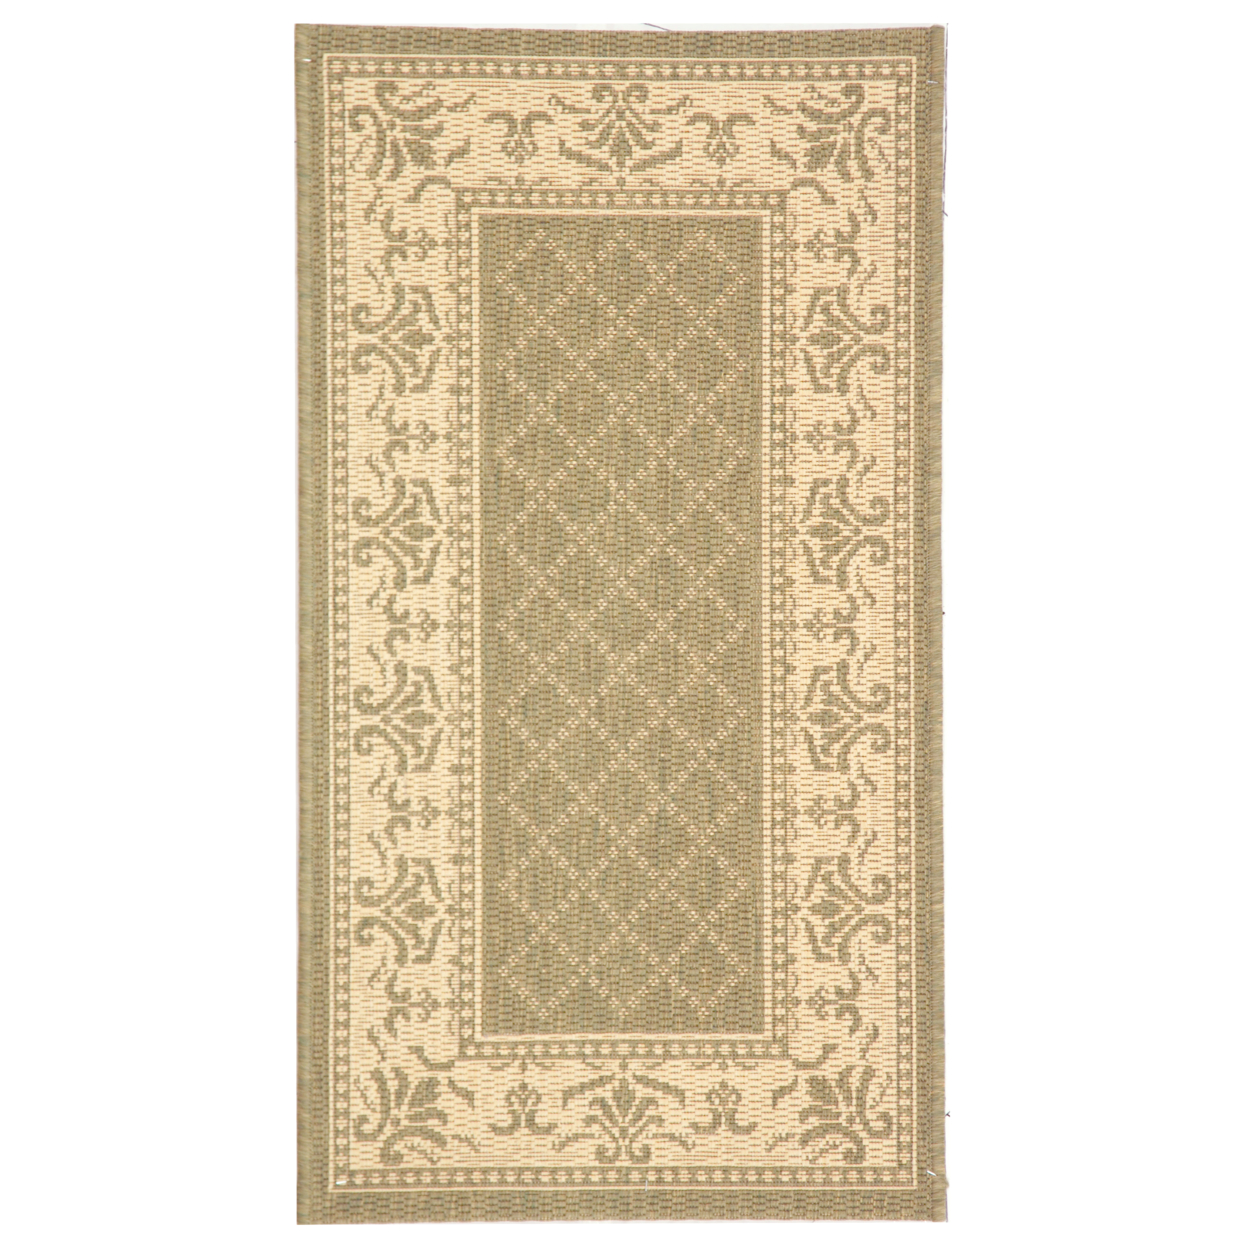 SAFAVIEH Outdoor CY0901-1E06 Courtyard Olive / Natural Rug - 4' X 5' 7